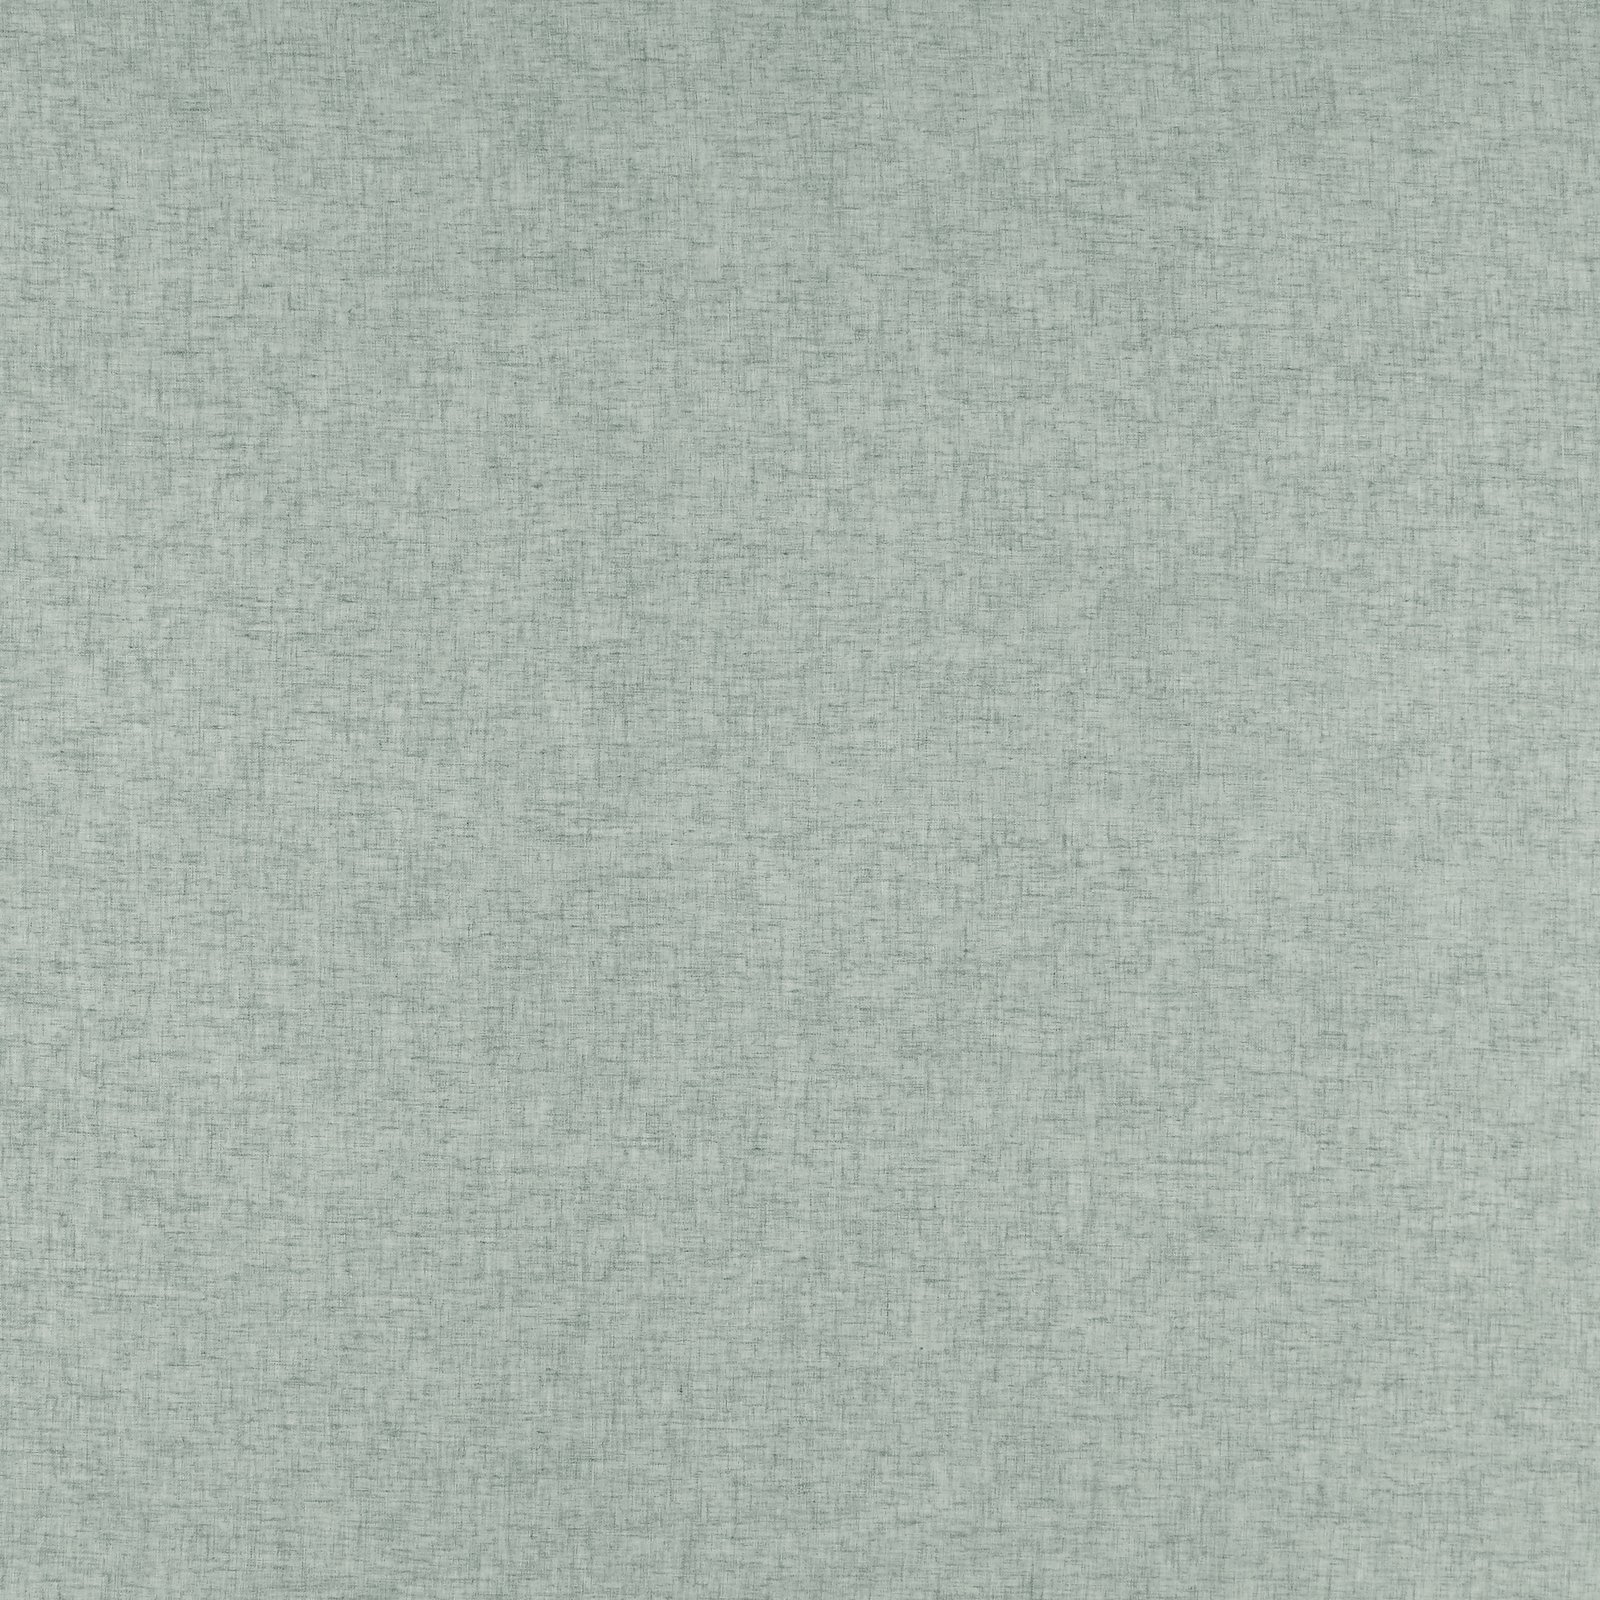 Voile dusty aqua blue polyester/linen blend 835189_pack_solid